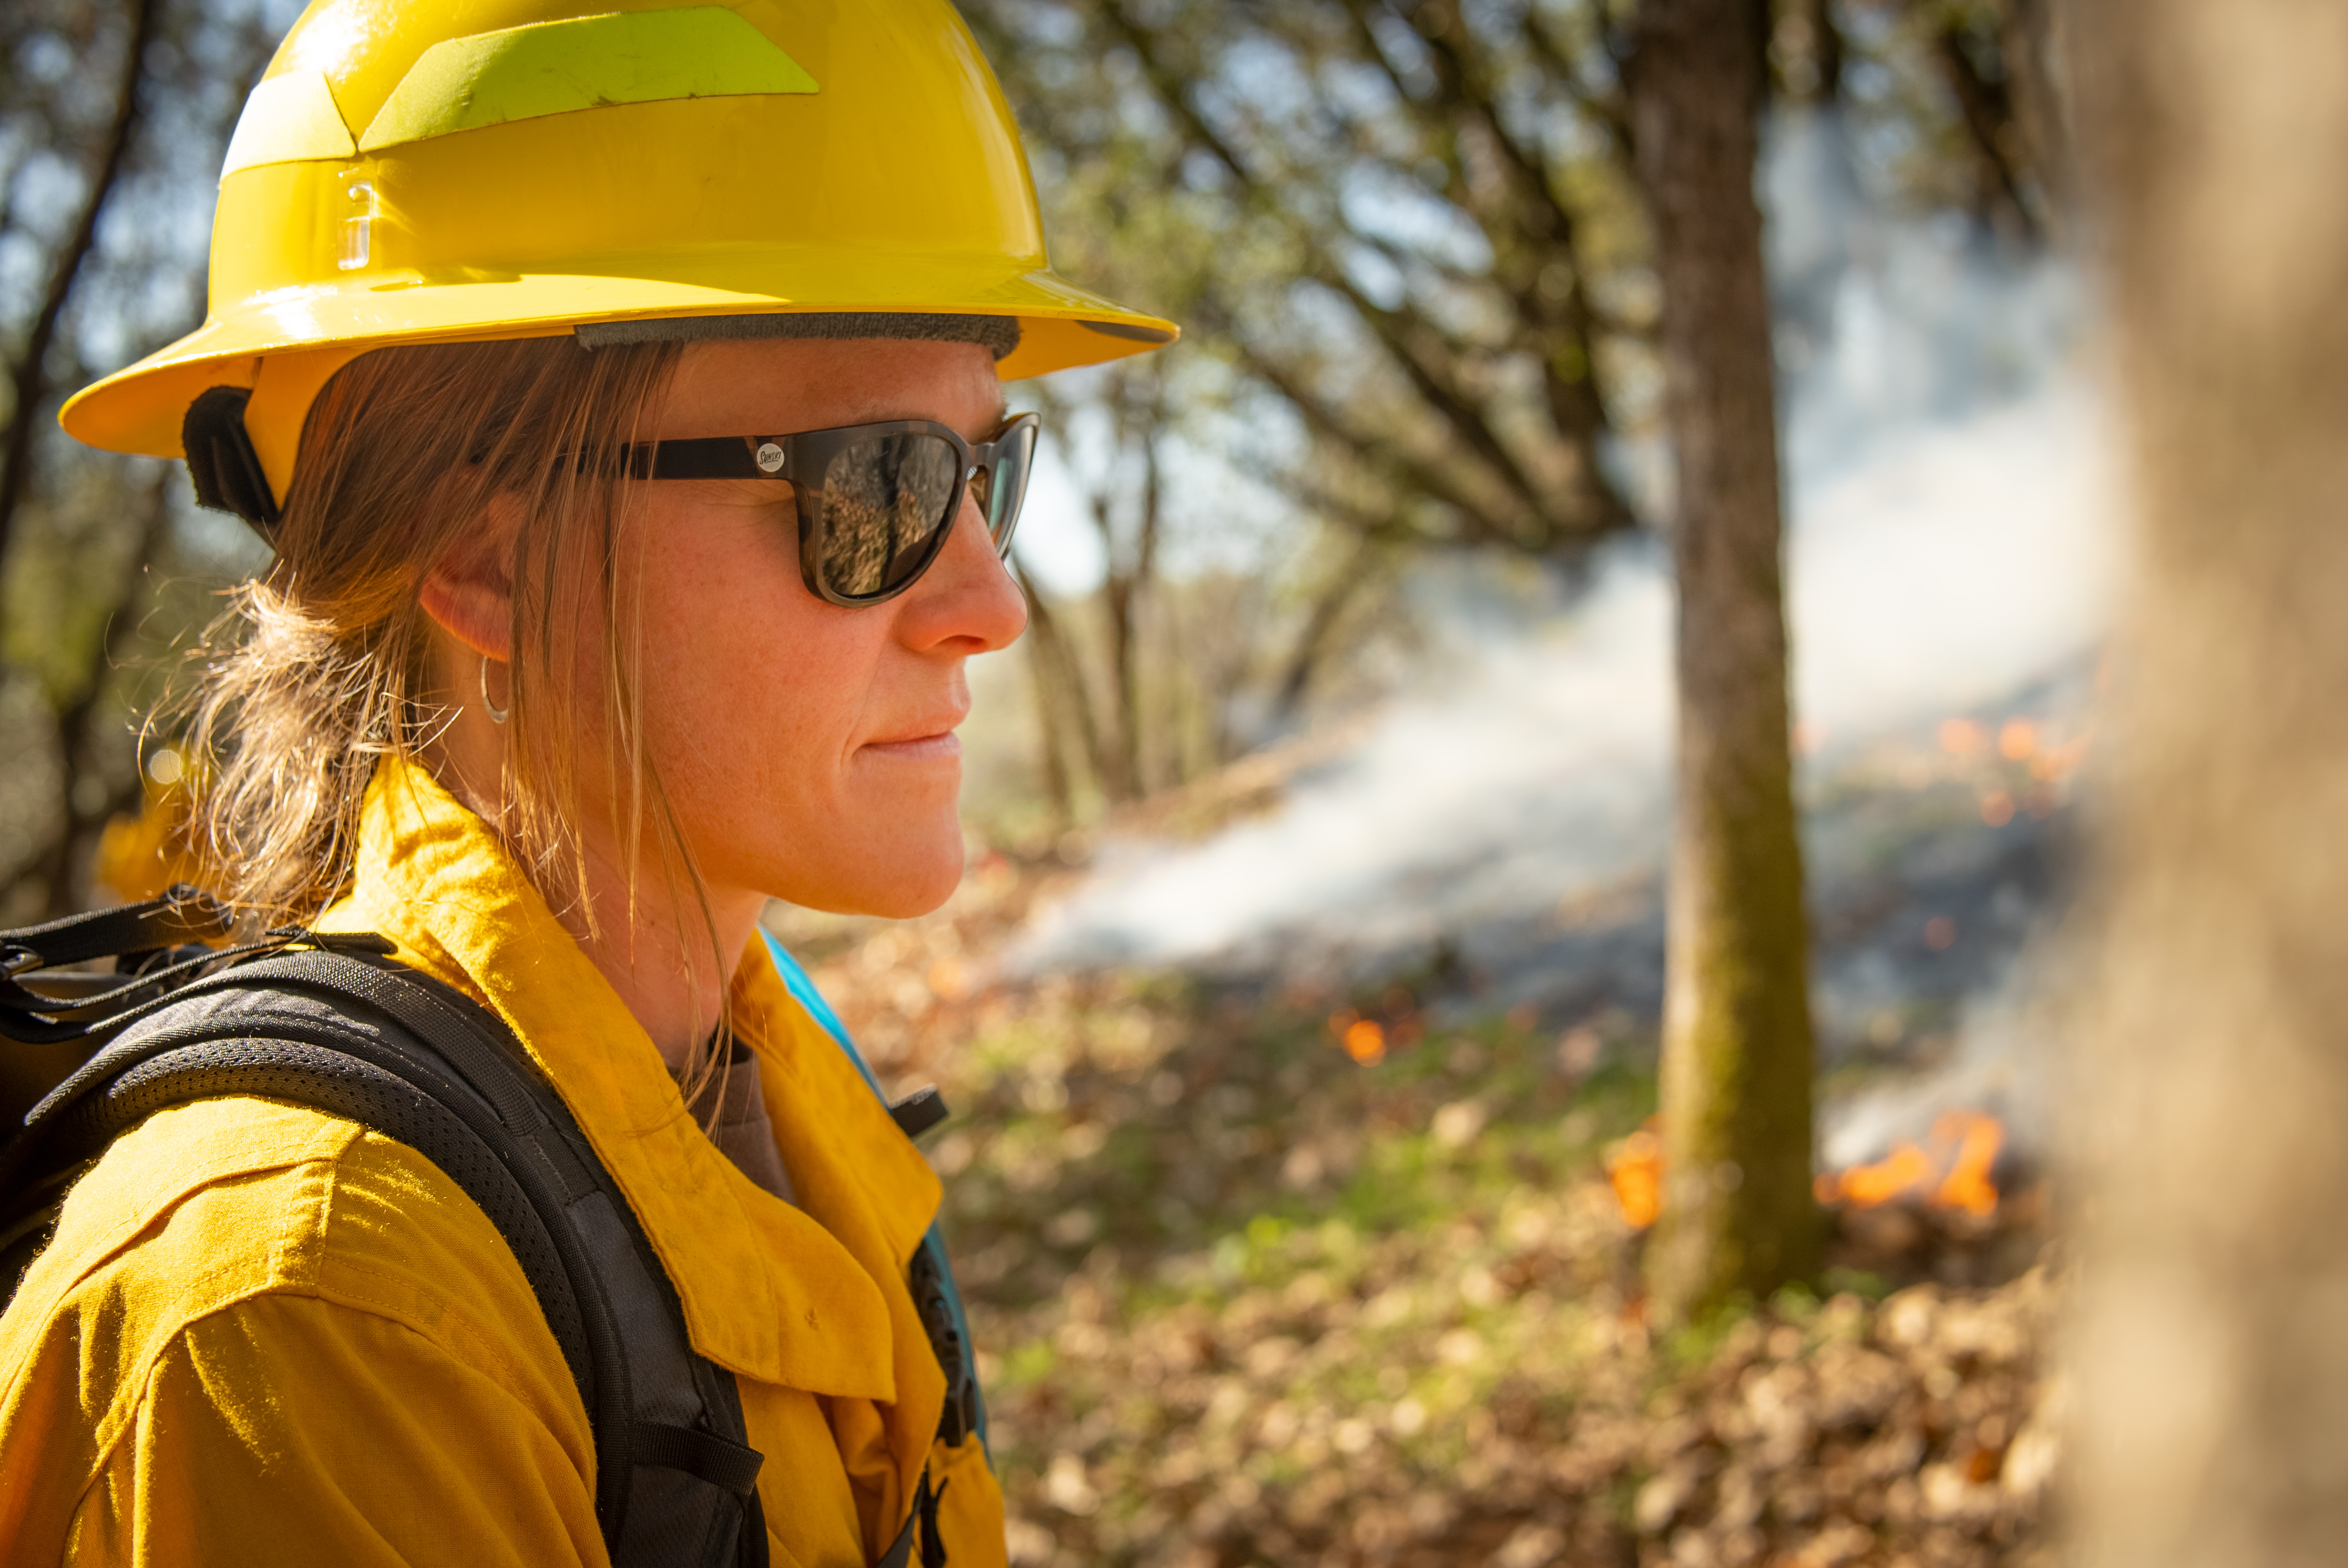 Woman in yellow hard hat and yellow shirt walks in forest with smoky background during prescribed fire